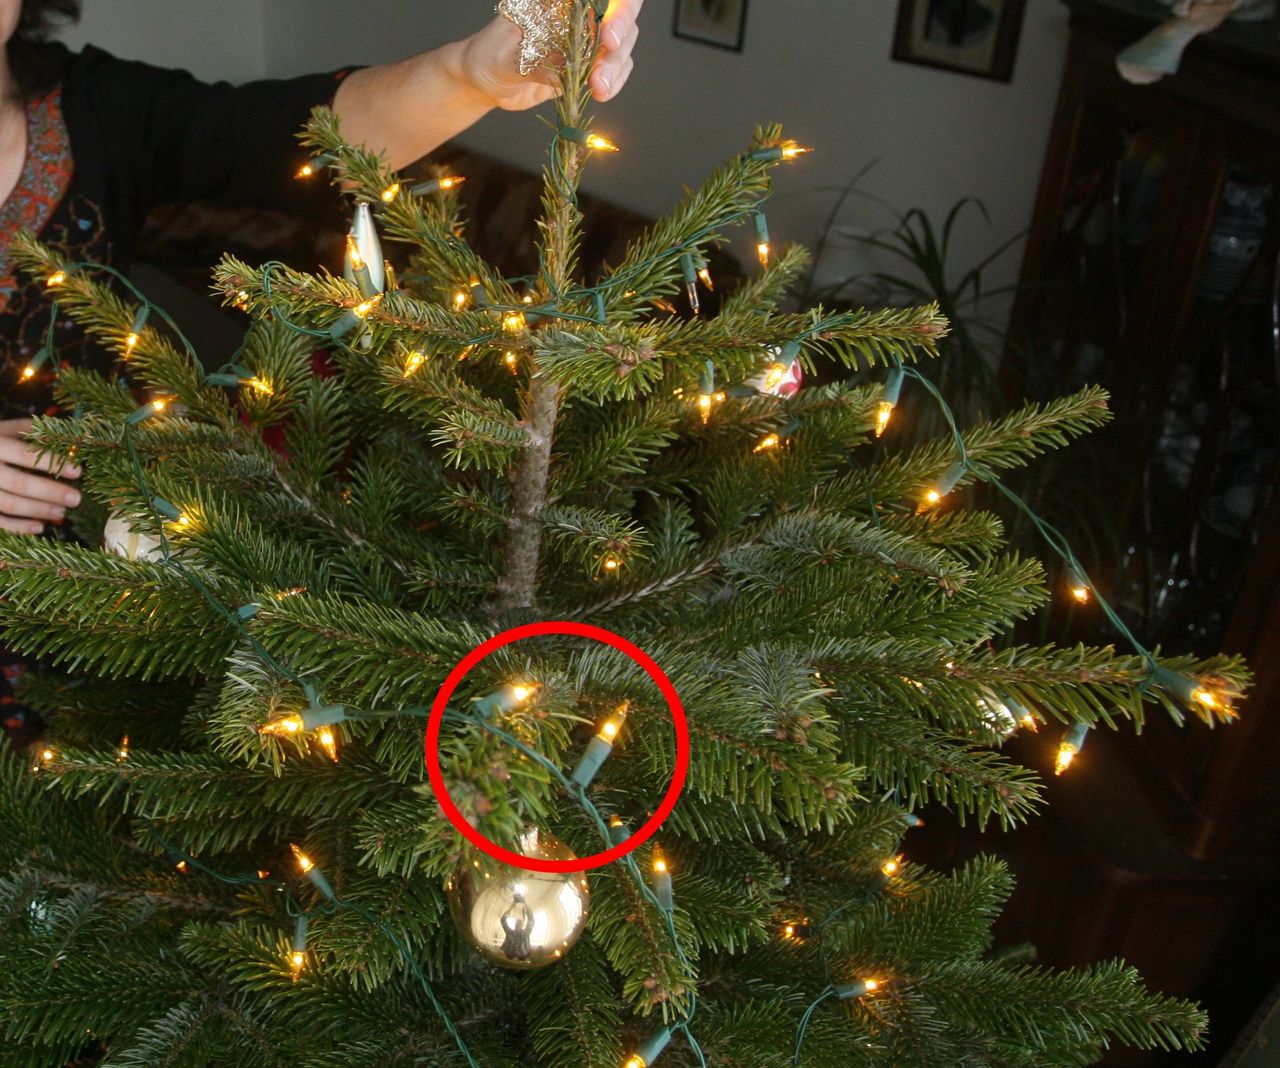 The hidden function of Christmas lights: A trick few people know about